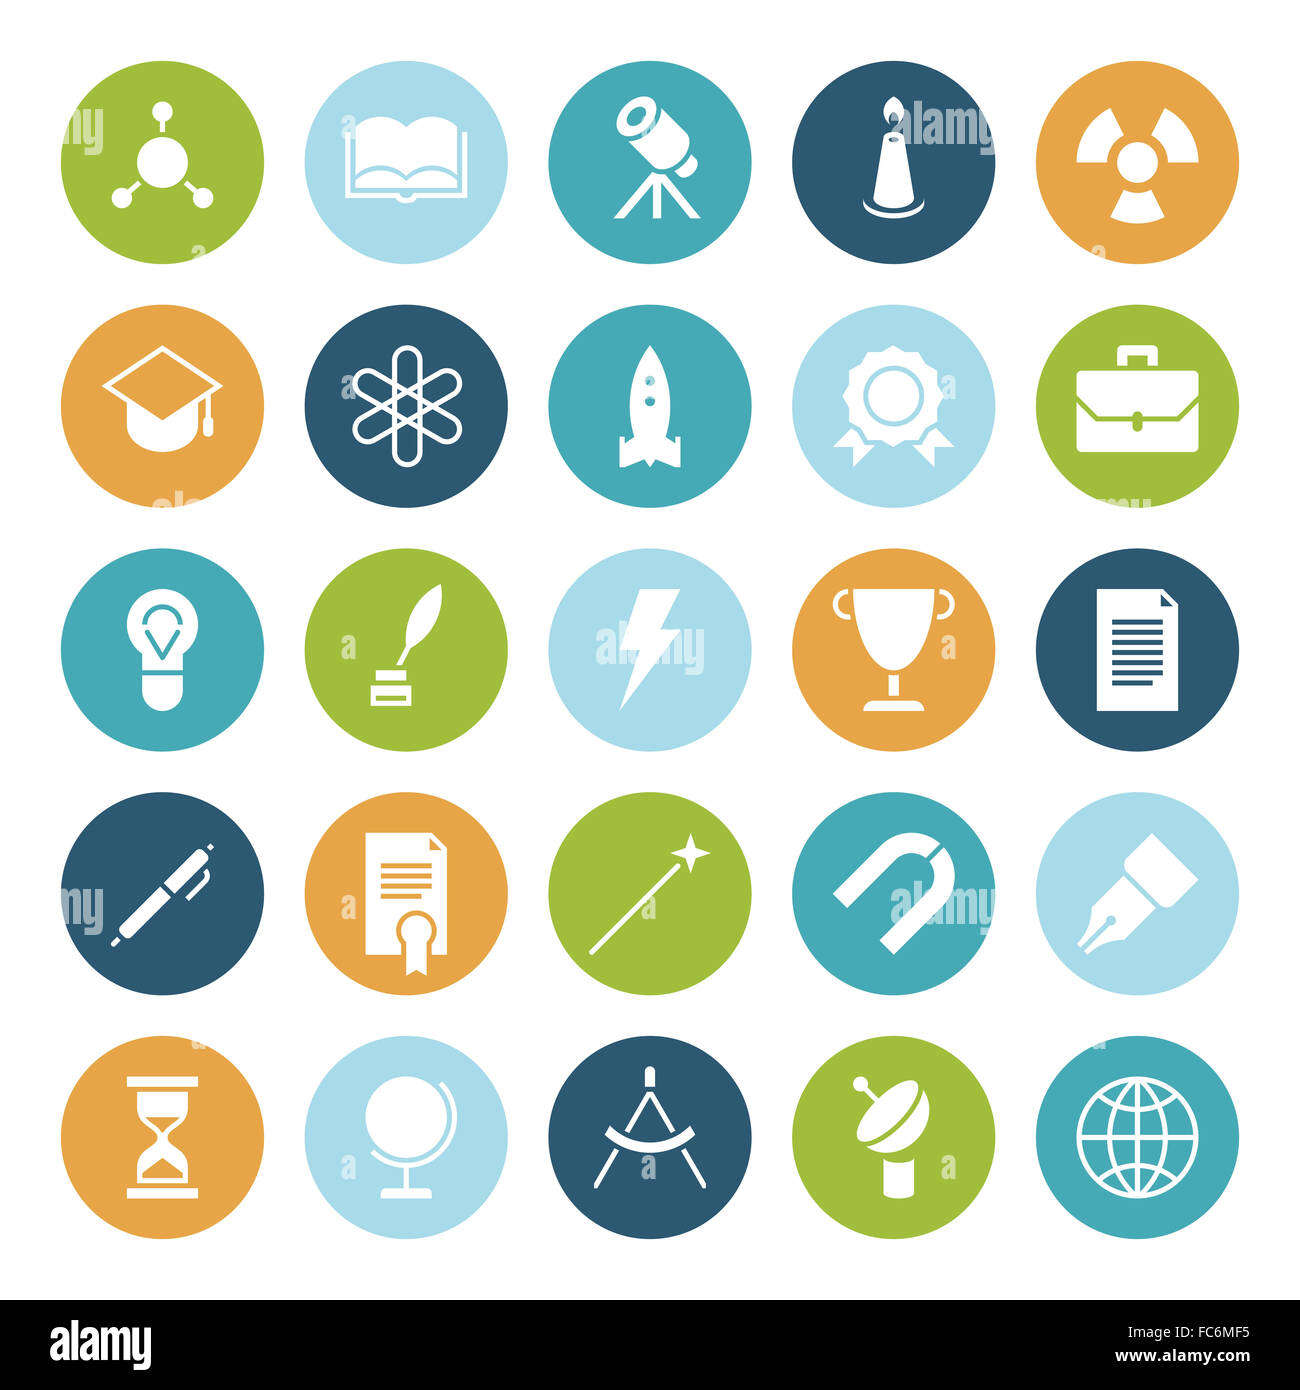 Flat design icons for education and science Stock Photo